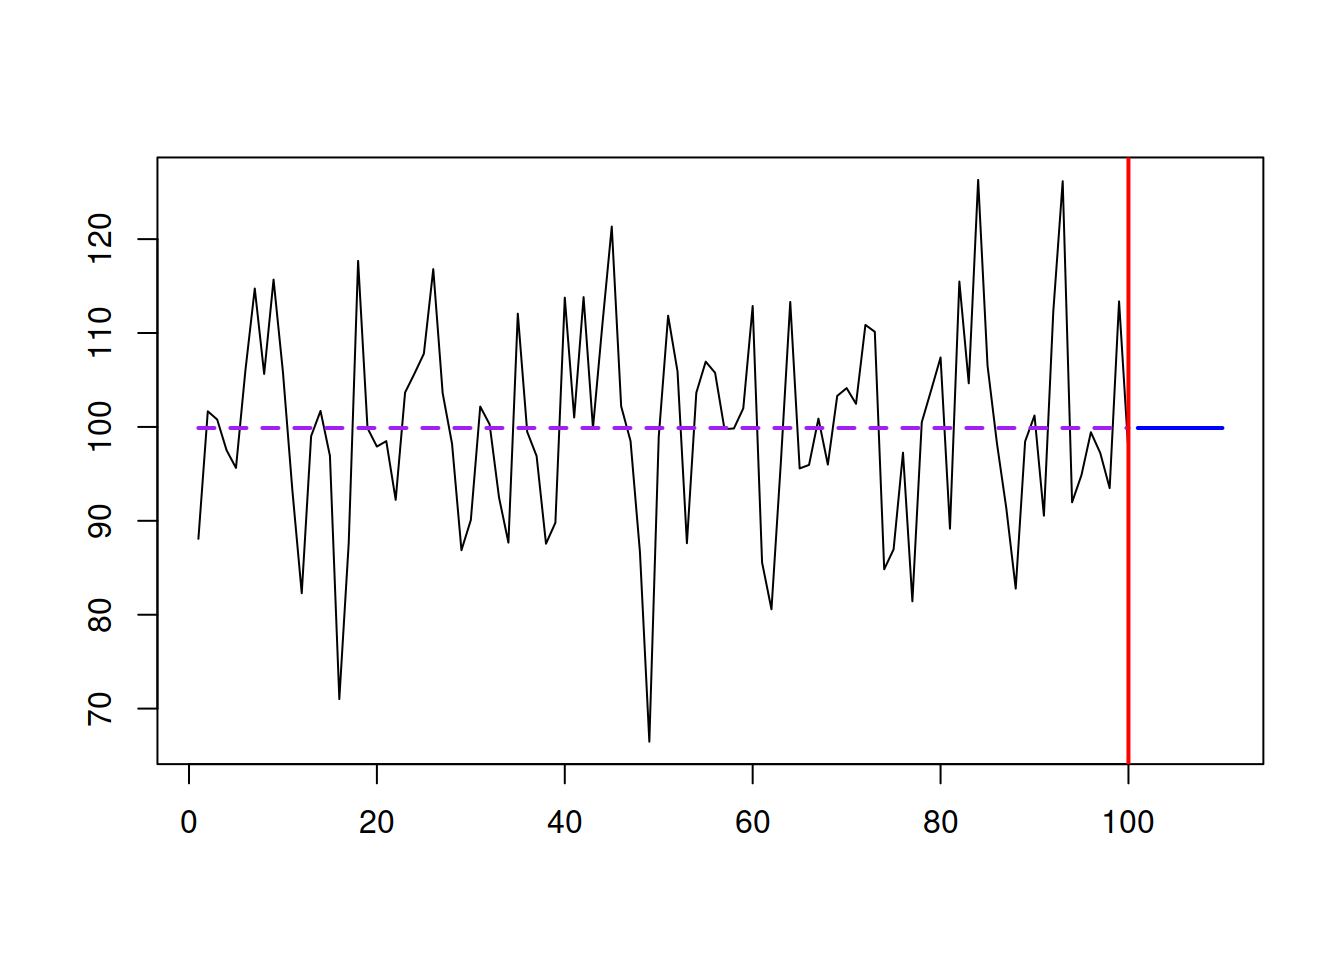 An example with a time series and SES forecast. $\hat{\alpha}=0.$